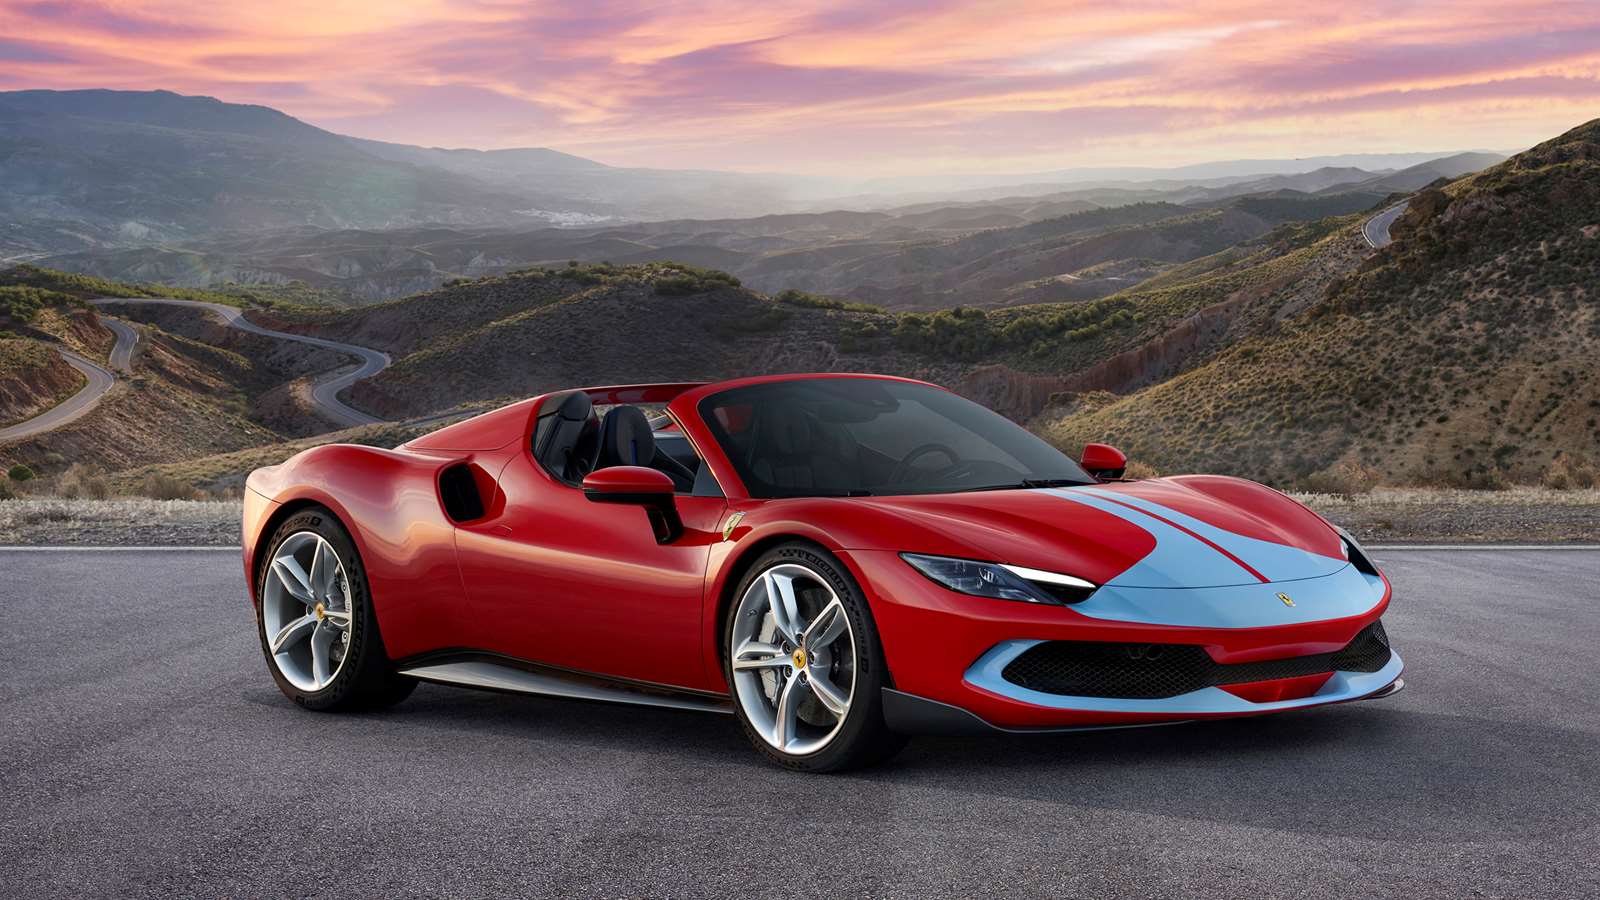 The best supercars and exotic cars on sale